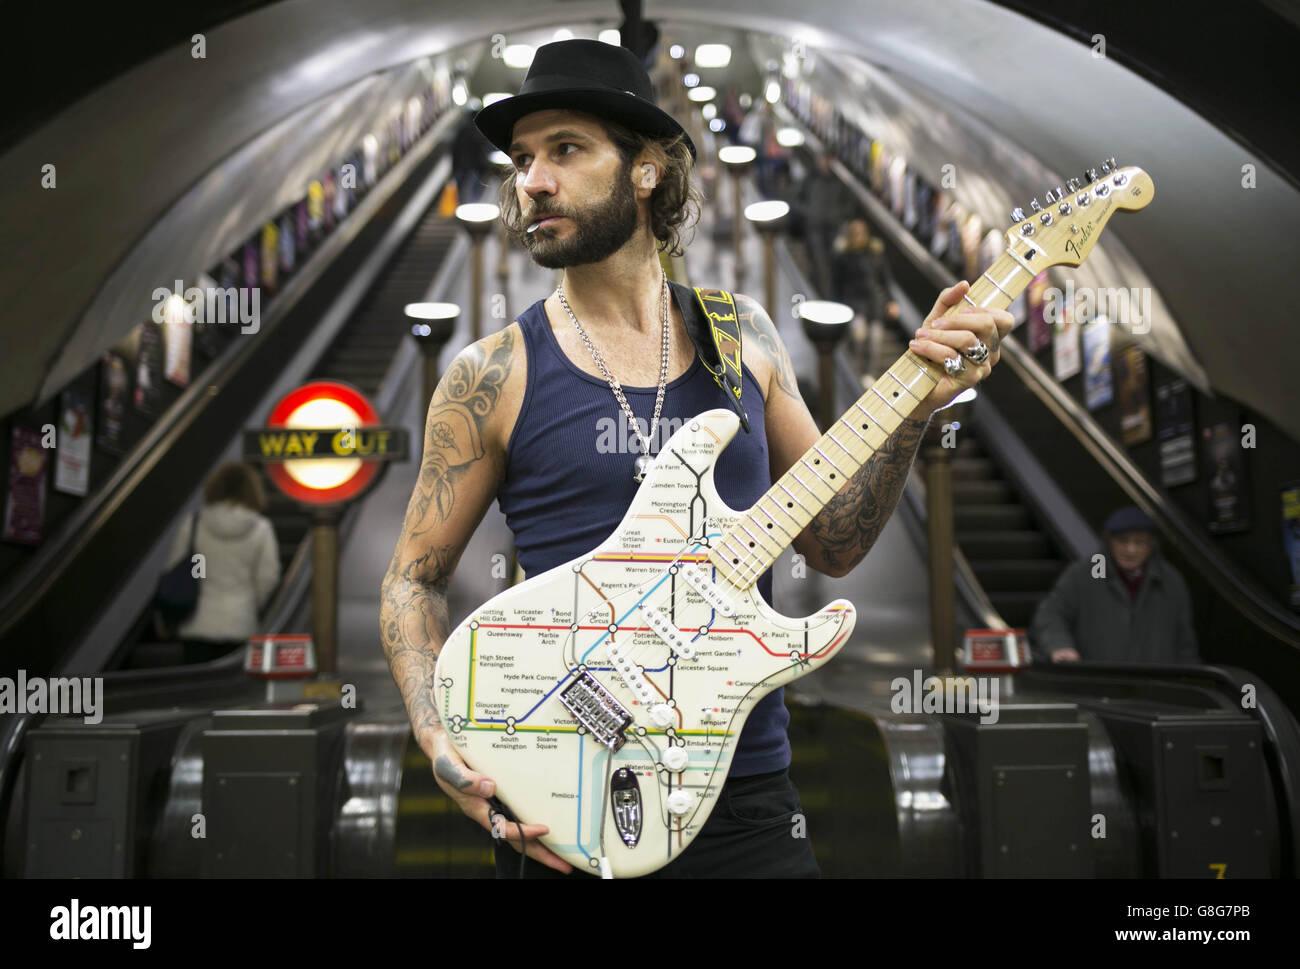 Musician James Black unveils a special edition Fender Stratocaster guitar illustrated with the London Underground map at St John's Wood Tube station, to celebrate Transport for London and the London Transport Museum's Transported by Design programme. Stock Photo